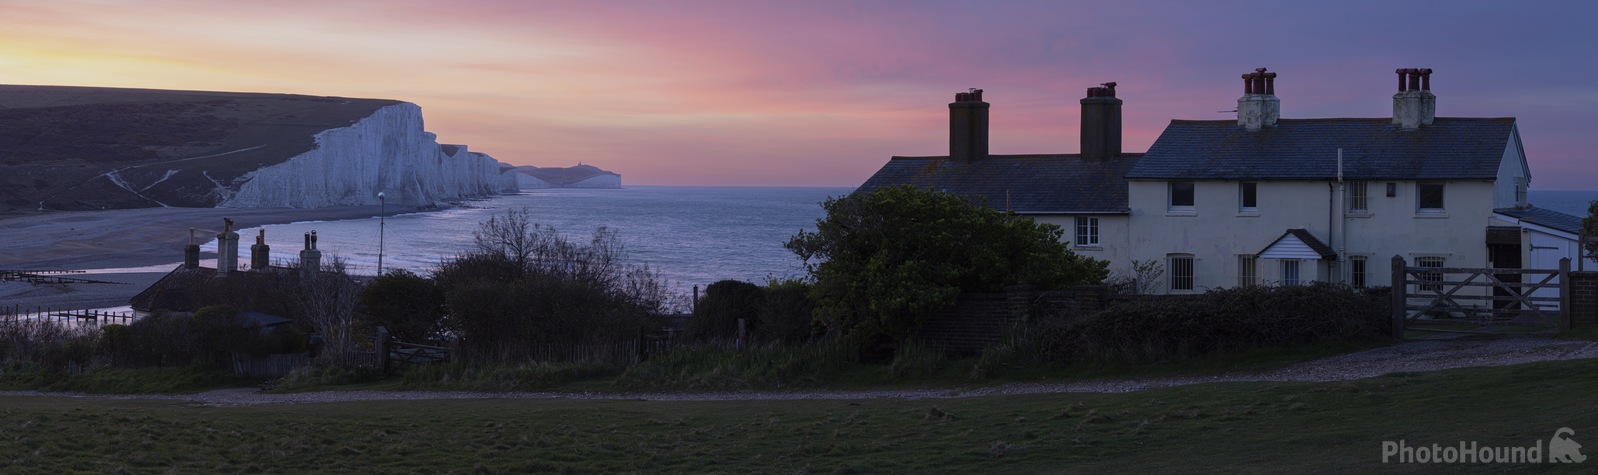 Image of Coastguard Cottages & Seven Sisters by Pete McNair